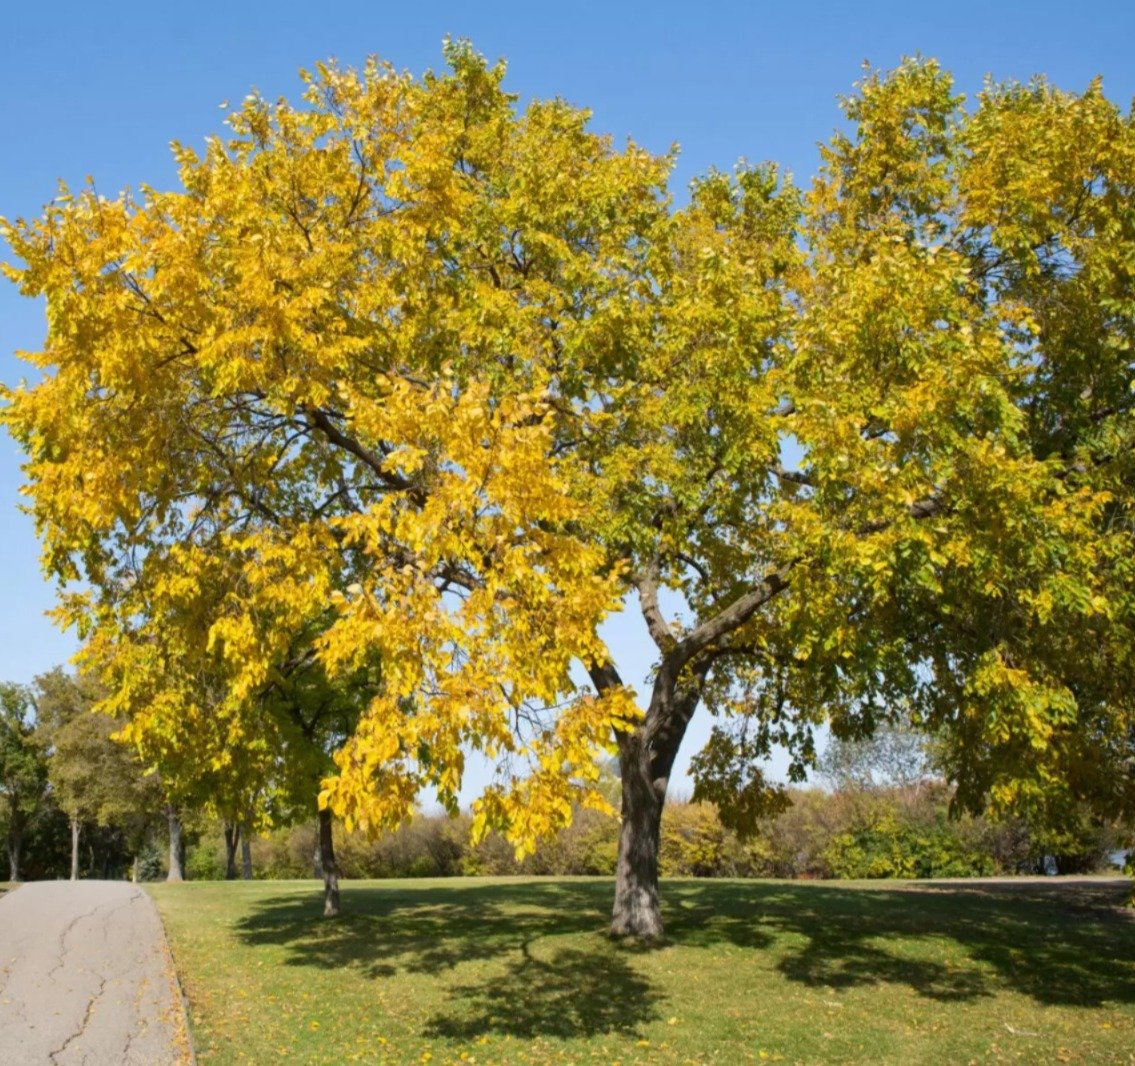 American Elm tree with yellow foliage in park, road visible in the background